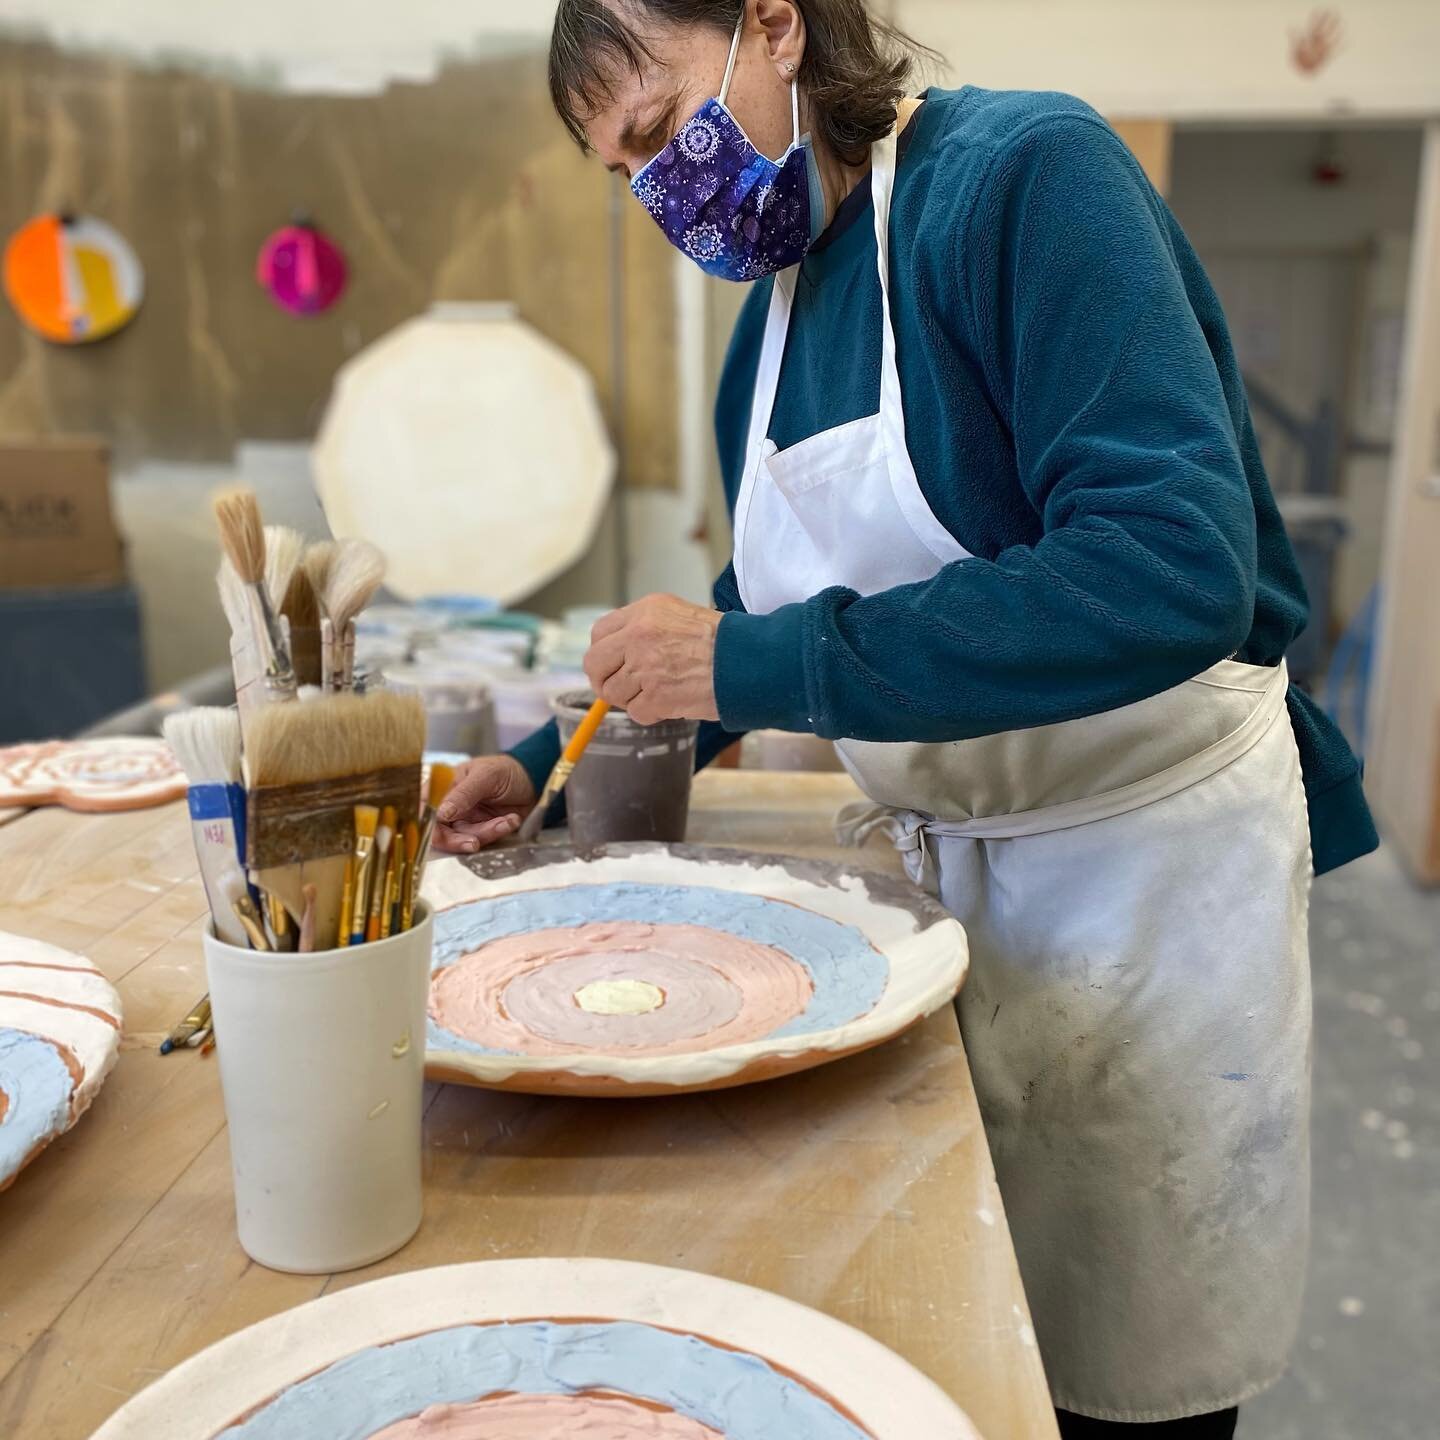 Polly Apfelbaum drawing and glazing in the Arcadia ceramics studio. Works in progress for &quot;For the Love of Una Hale&quot; photos: @rachelgeisinger #pollyapfelbaum #artistinresidence #arcadiauniversity #ceramics #studio #pew